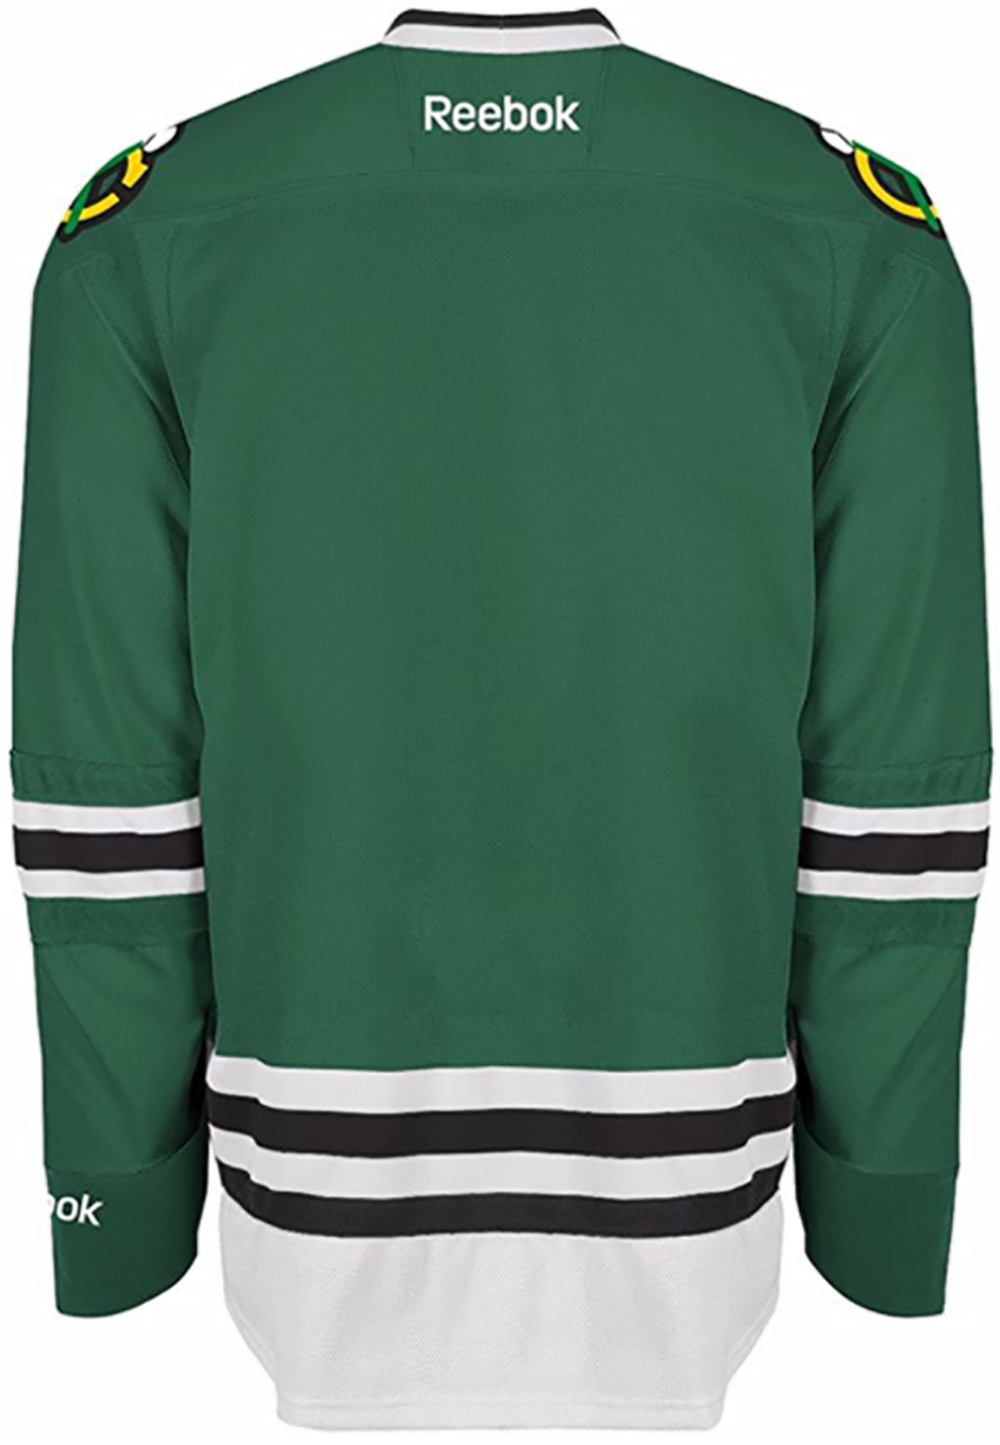 Chicago Blackhawks Youth Green Premier Stitched Jersey